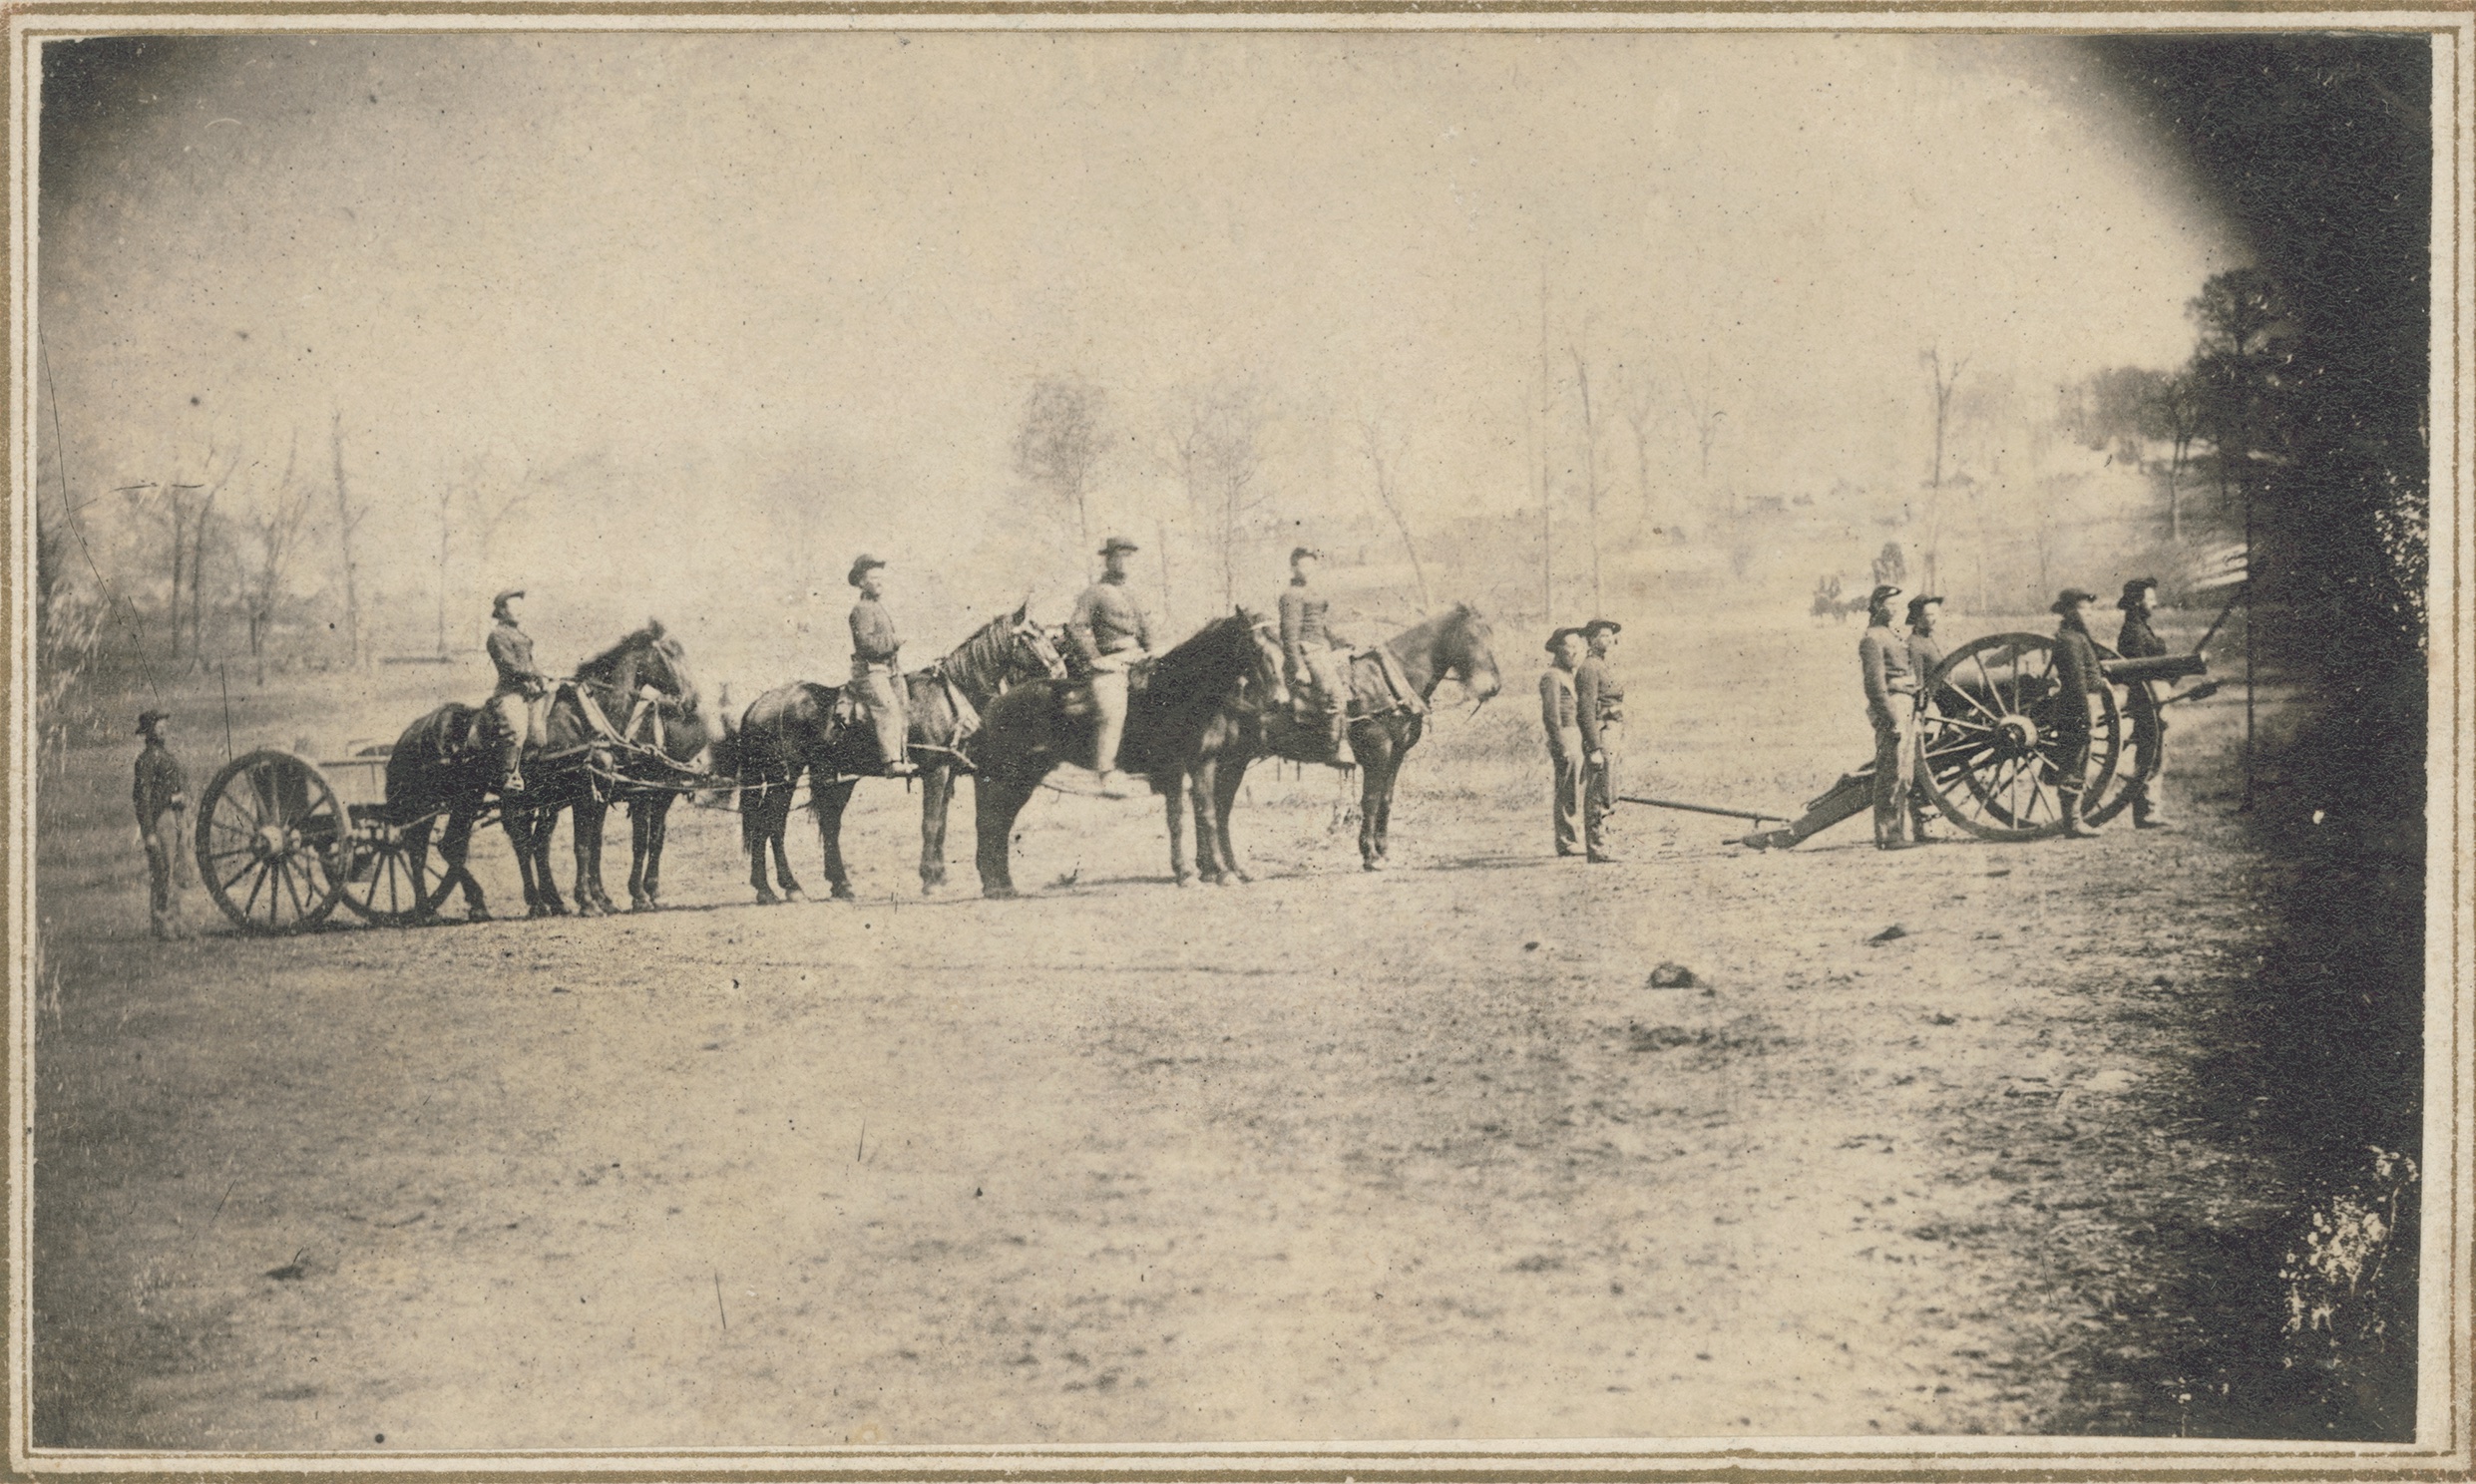 Members of the 3rd Wisconsin Artillery, also known as the “Badger Battery,” at their Camp Randall, Wis., training camp. At Stones River, the battery retreated across the river before Breckinridge’s January 2 onslaught, and re-formed in Mendenhall’s line. (Courtesy of the Wisconsin Historical Society)